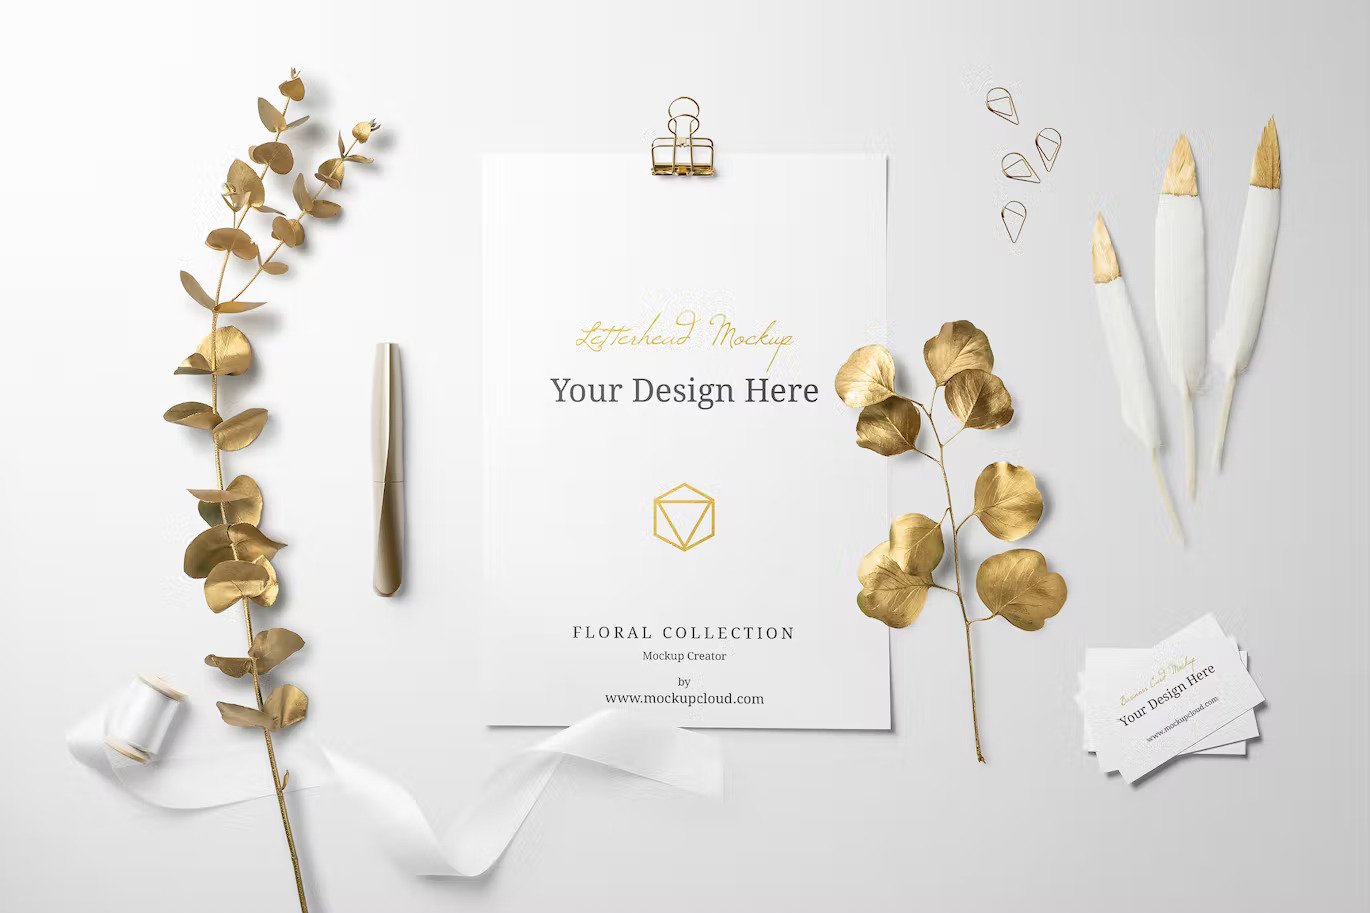 A branding mockup with golden plants